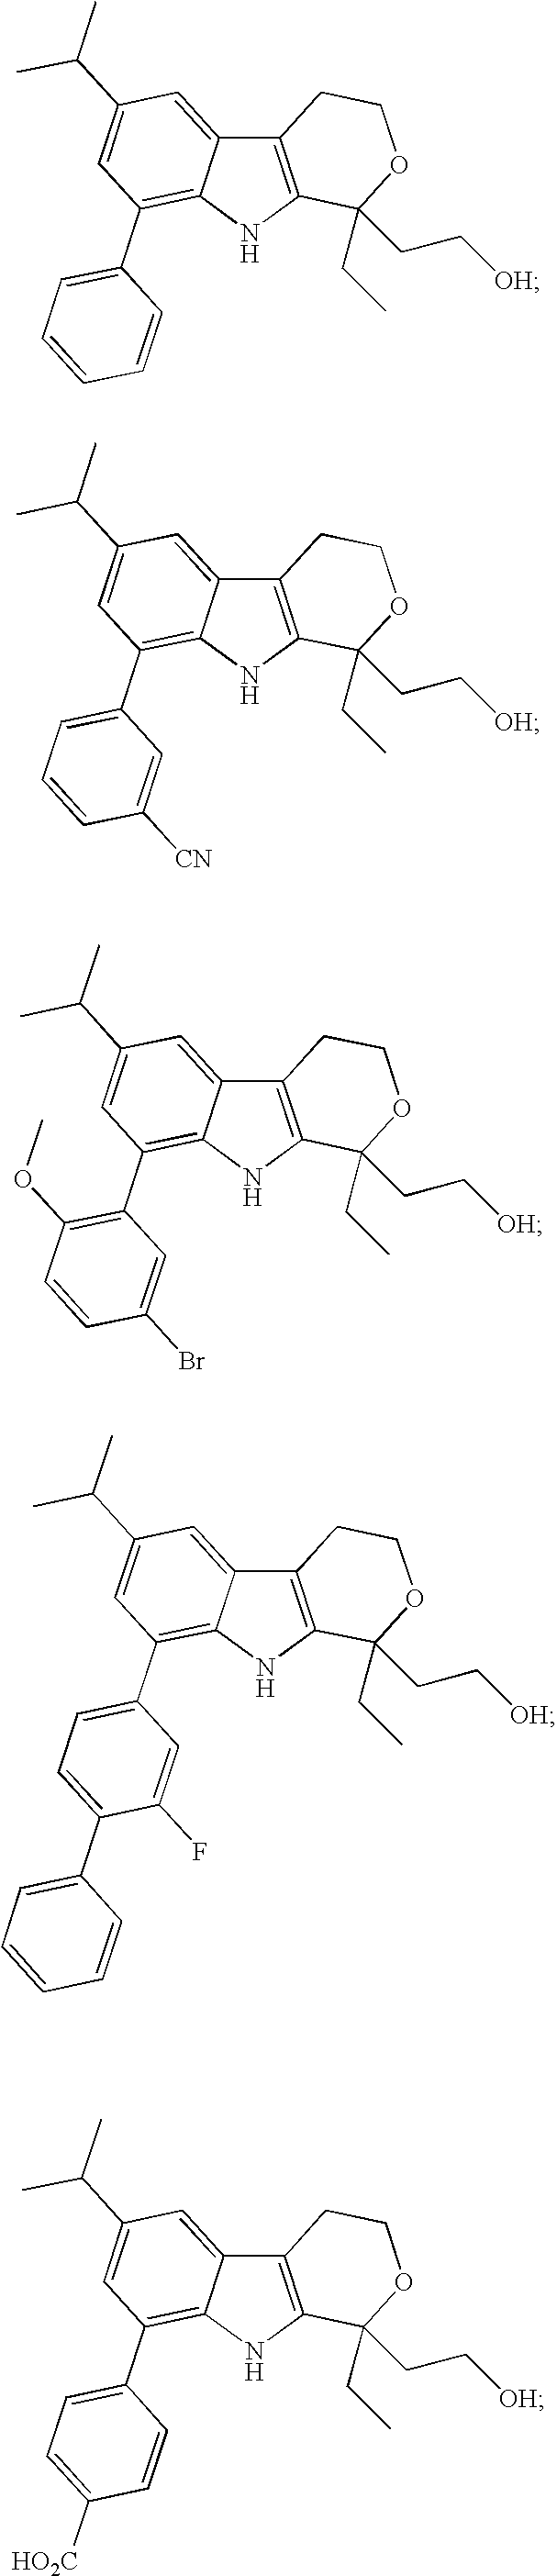 Direct racemization of indole derivatives